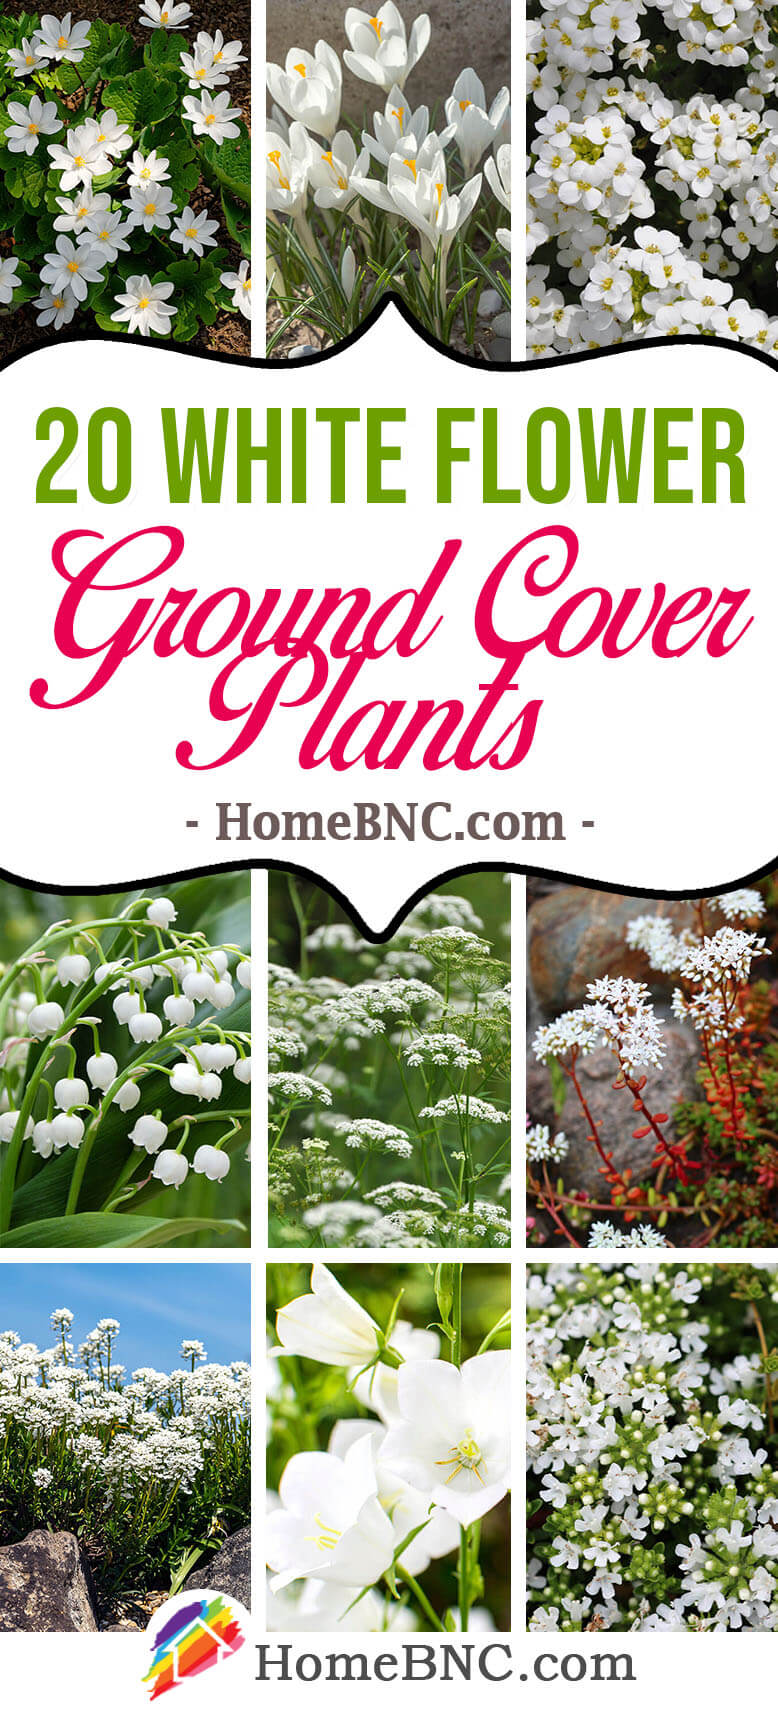 White Flower Ground Cover Plants